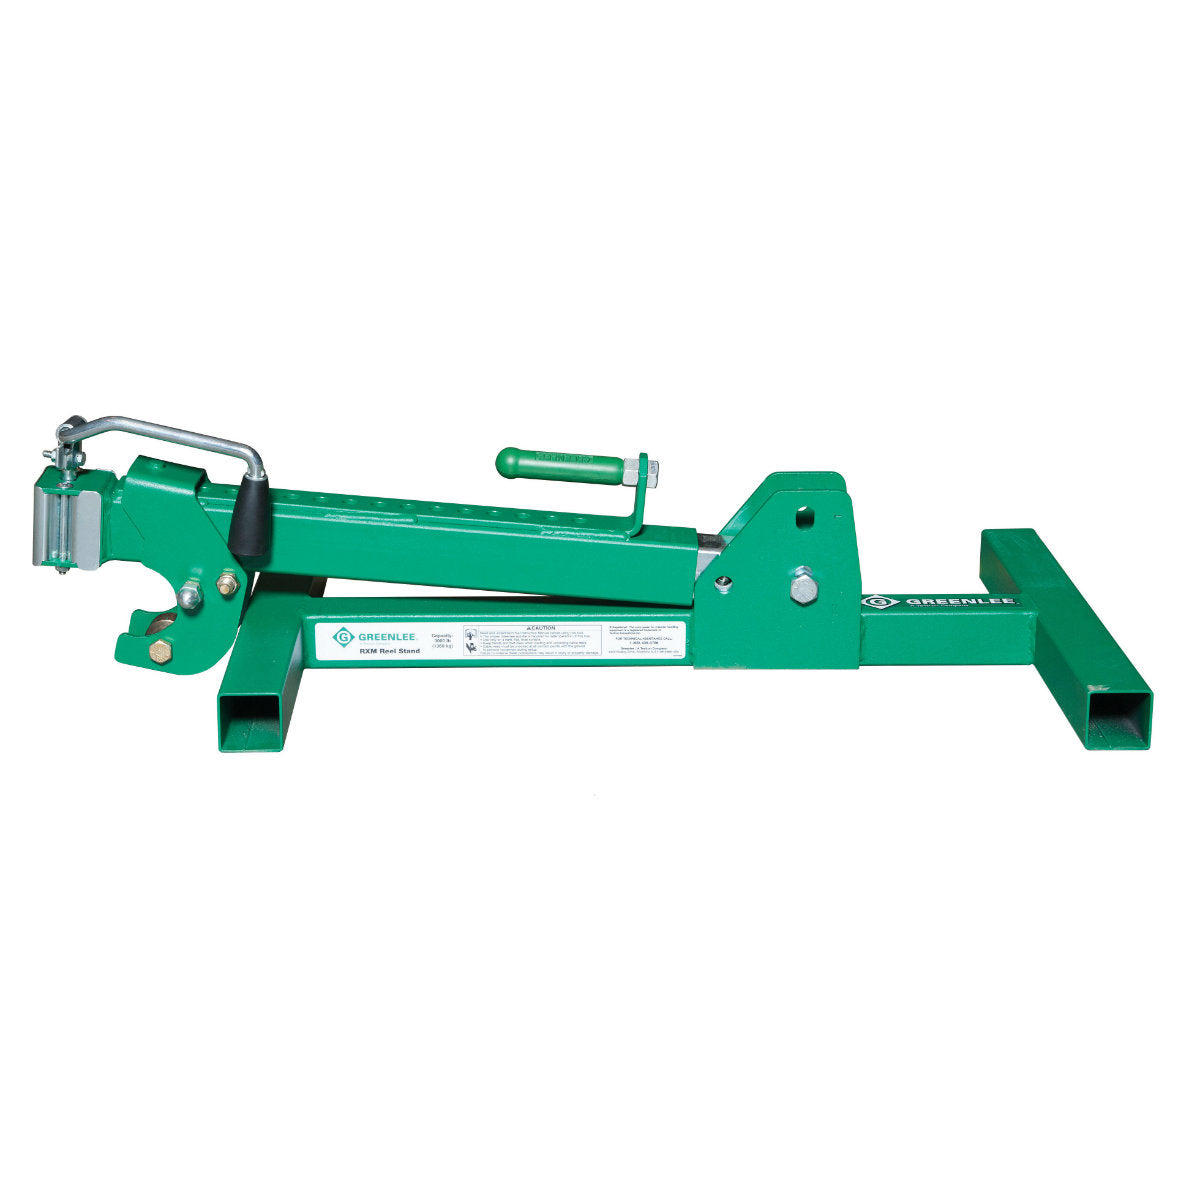 Greenlee 687 Screw-Type Reel Stand 13 - 28 (1 Stand Only)